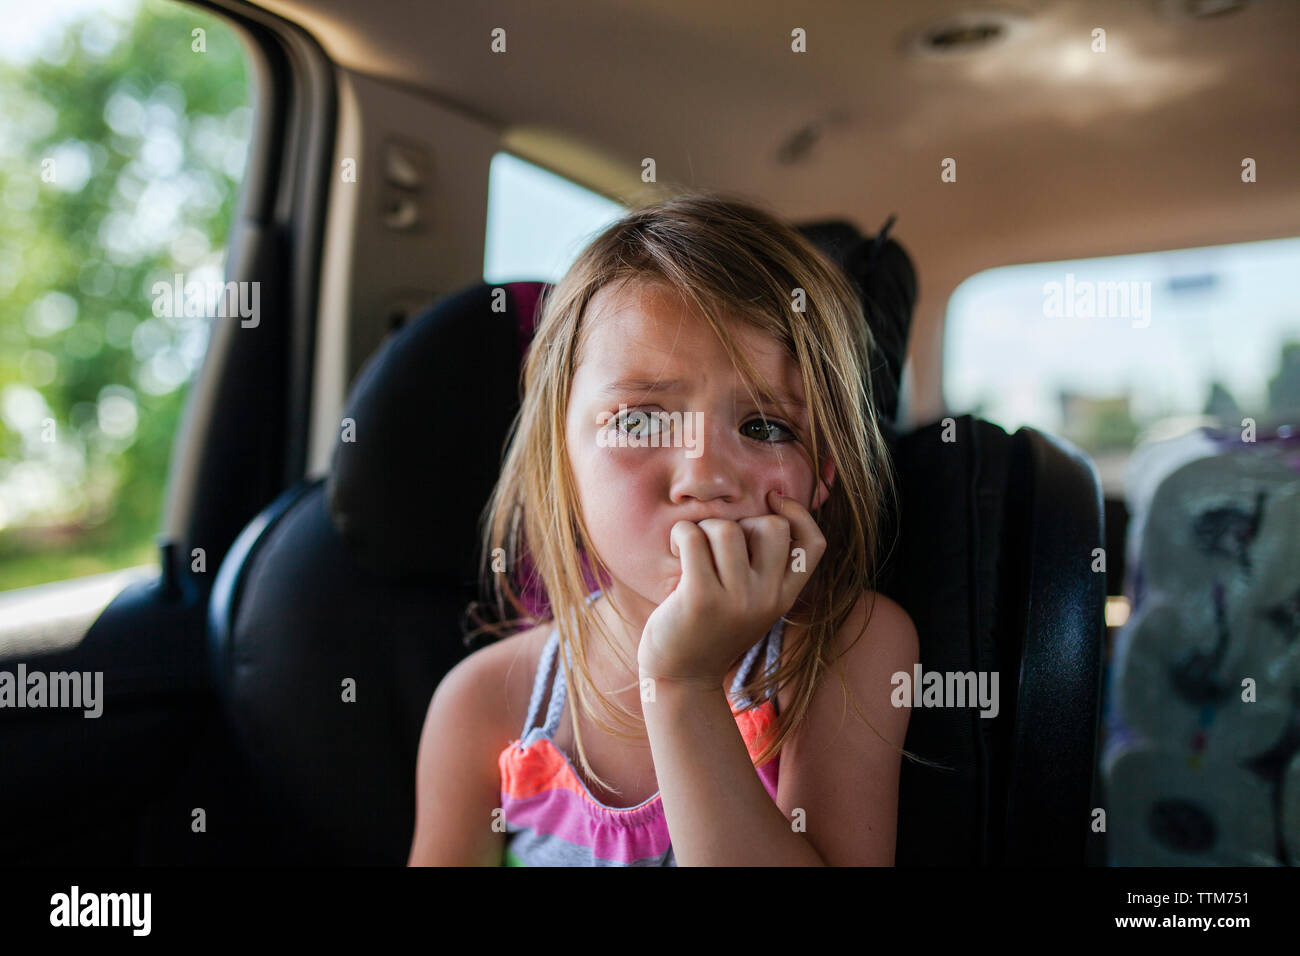 Upset girl looking away while sitting in car Banque D'Images